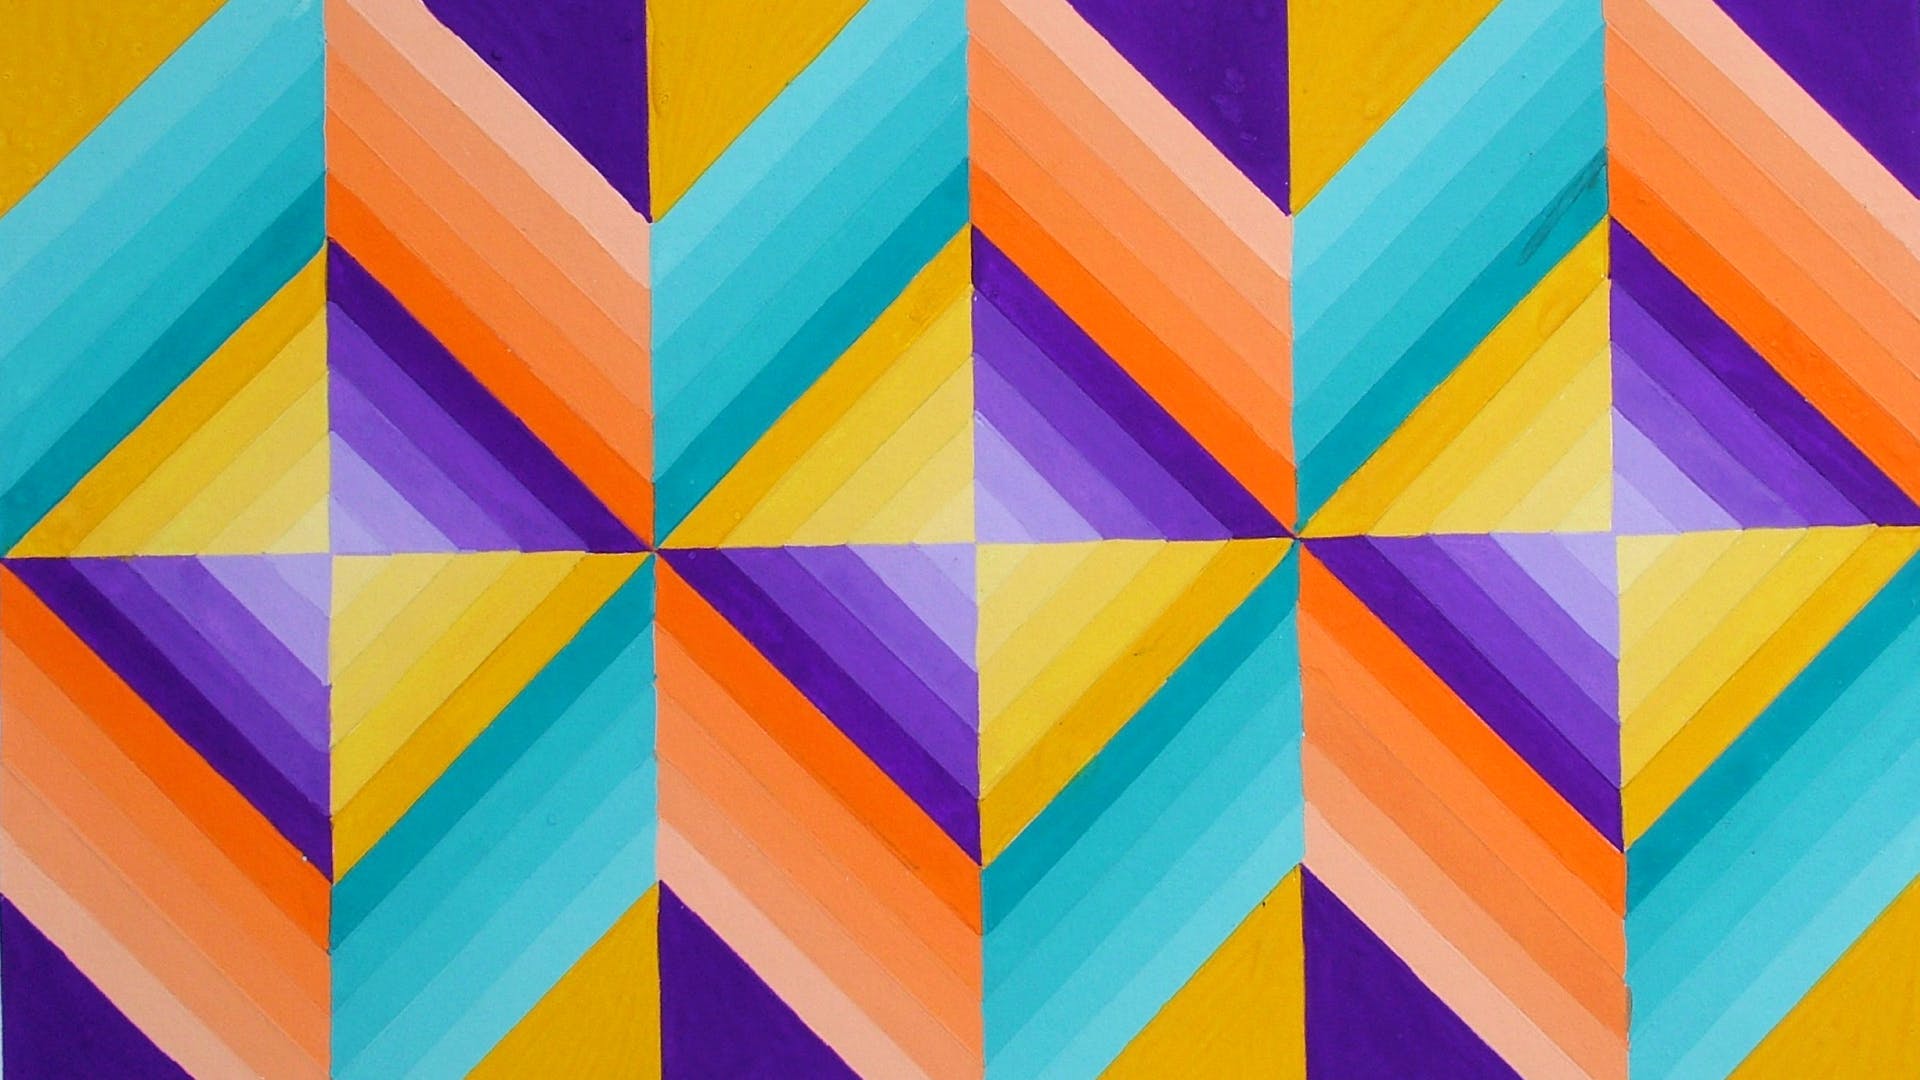 Pattern,Line,Colorfulness,Symmetry,Tints and shades,Triangle,Square